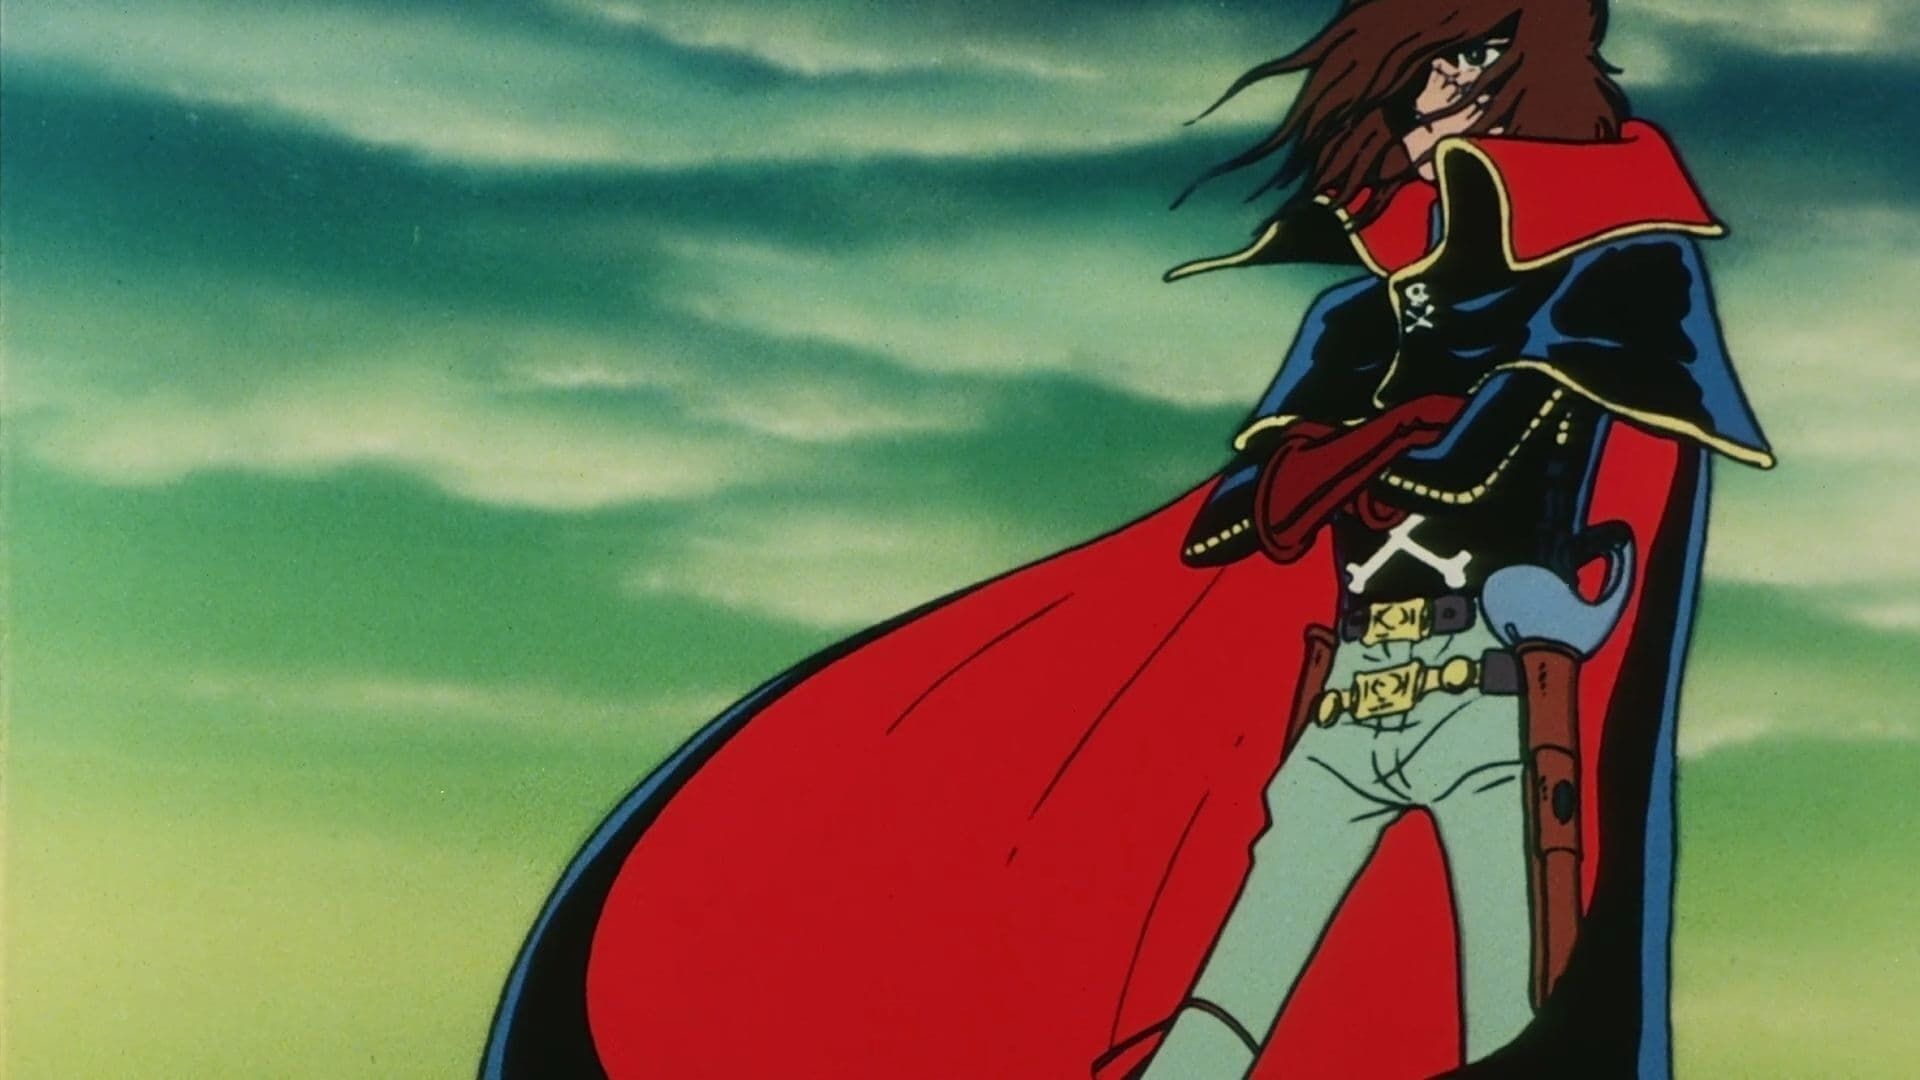 Cubierta de Space Pirate Captain Harlock: The Mystery of the Arcadia